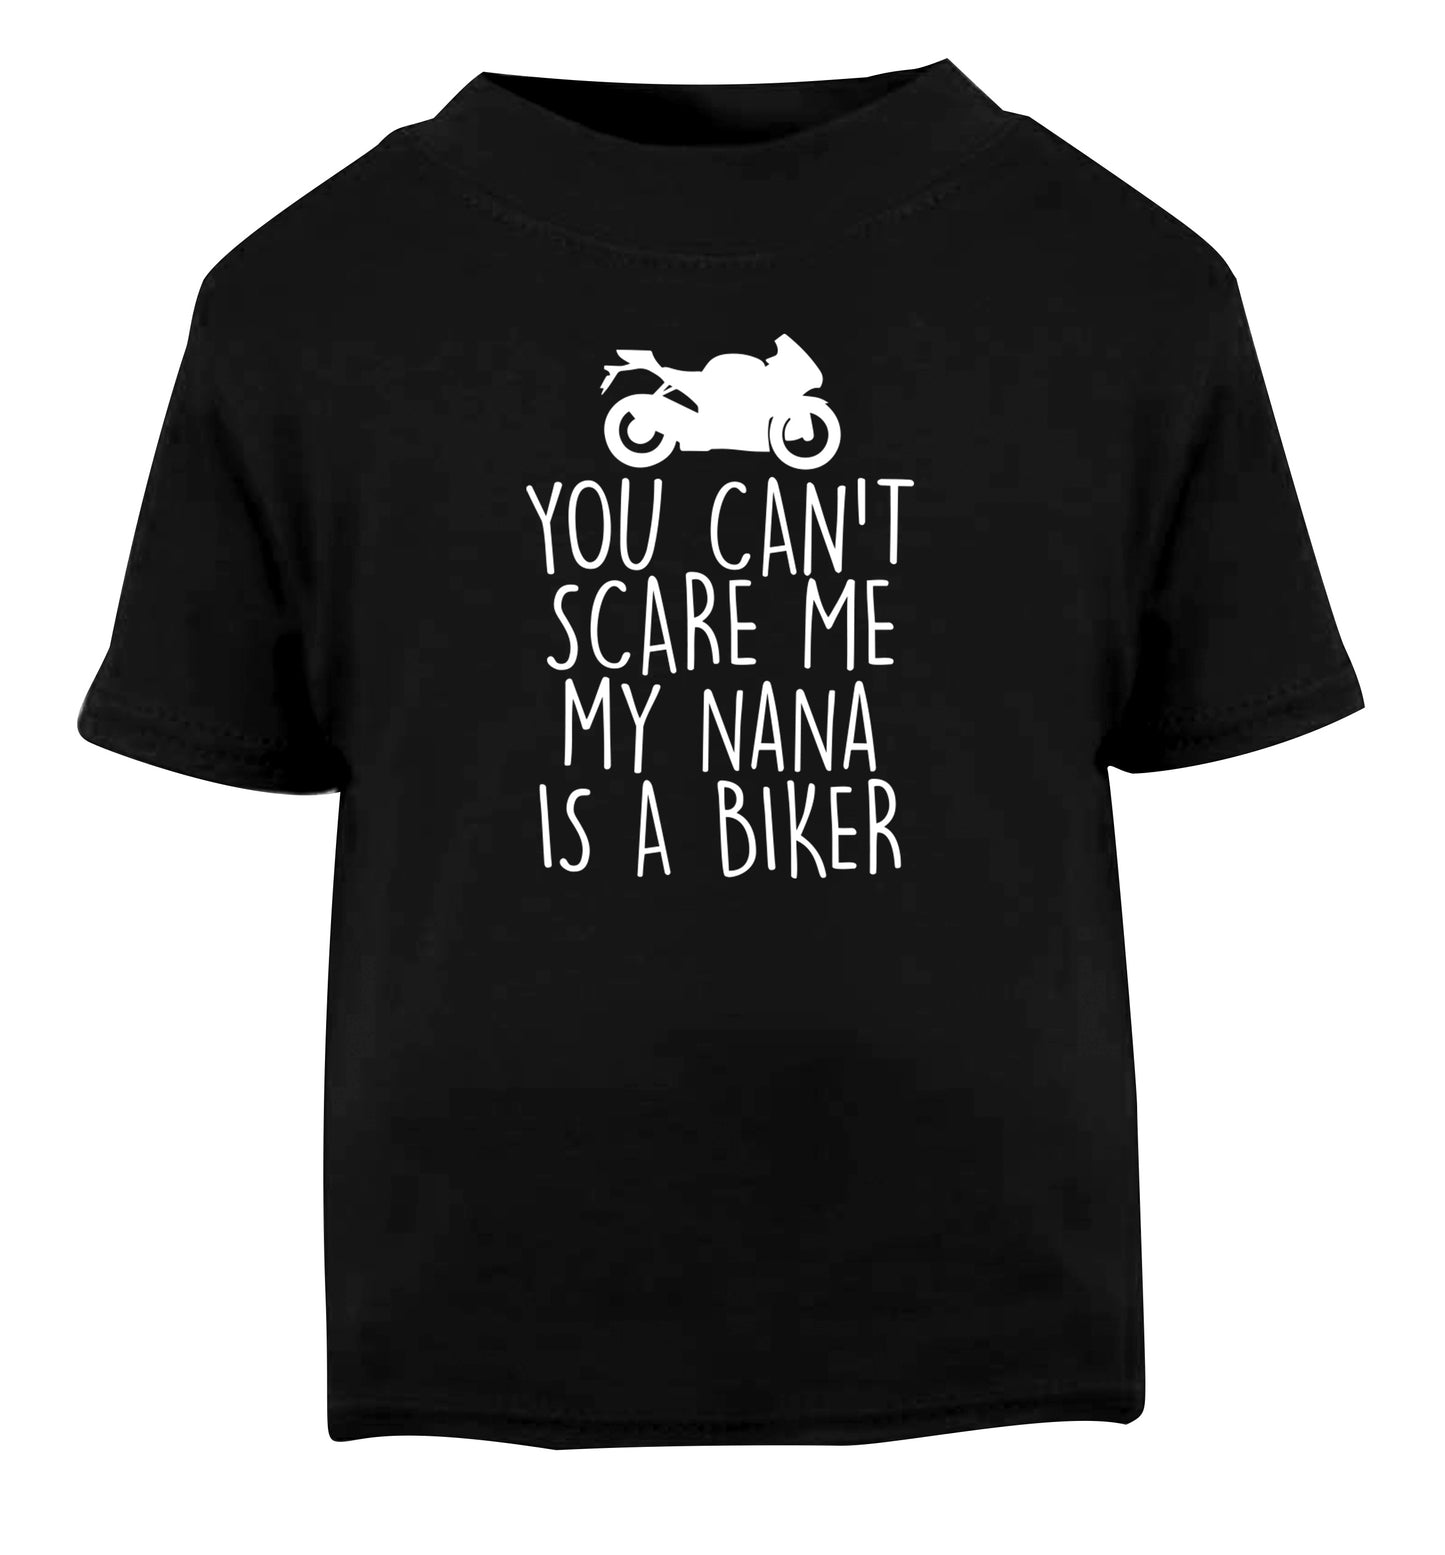 You can't scare me my nana is a biker Black Baby Toddler Tshirt 2 years